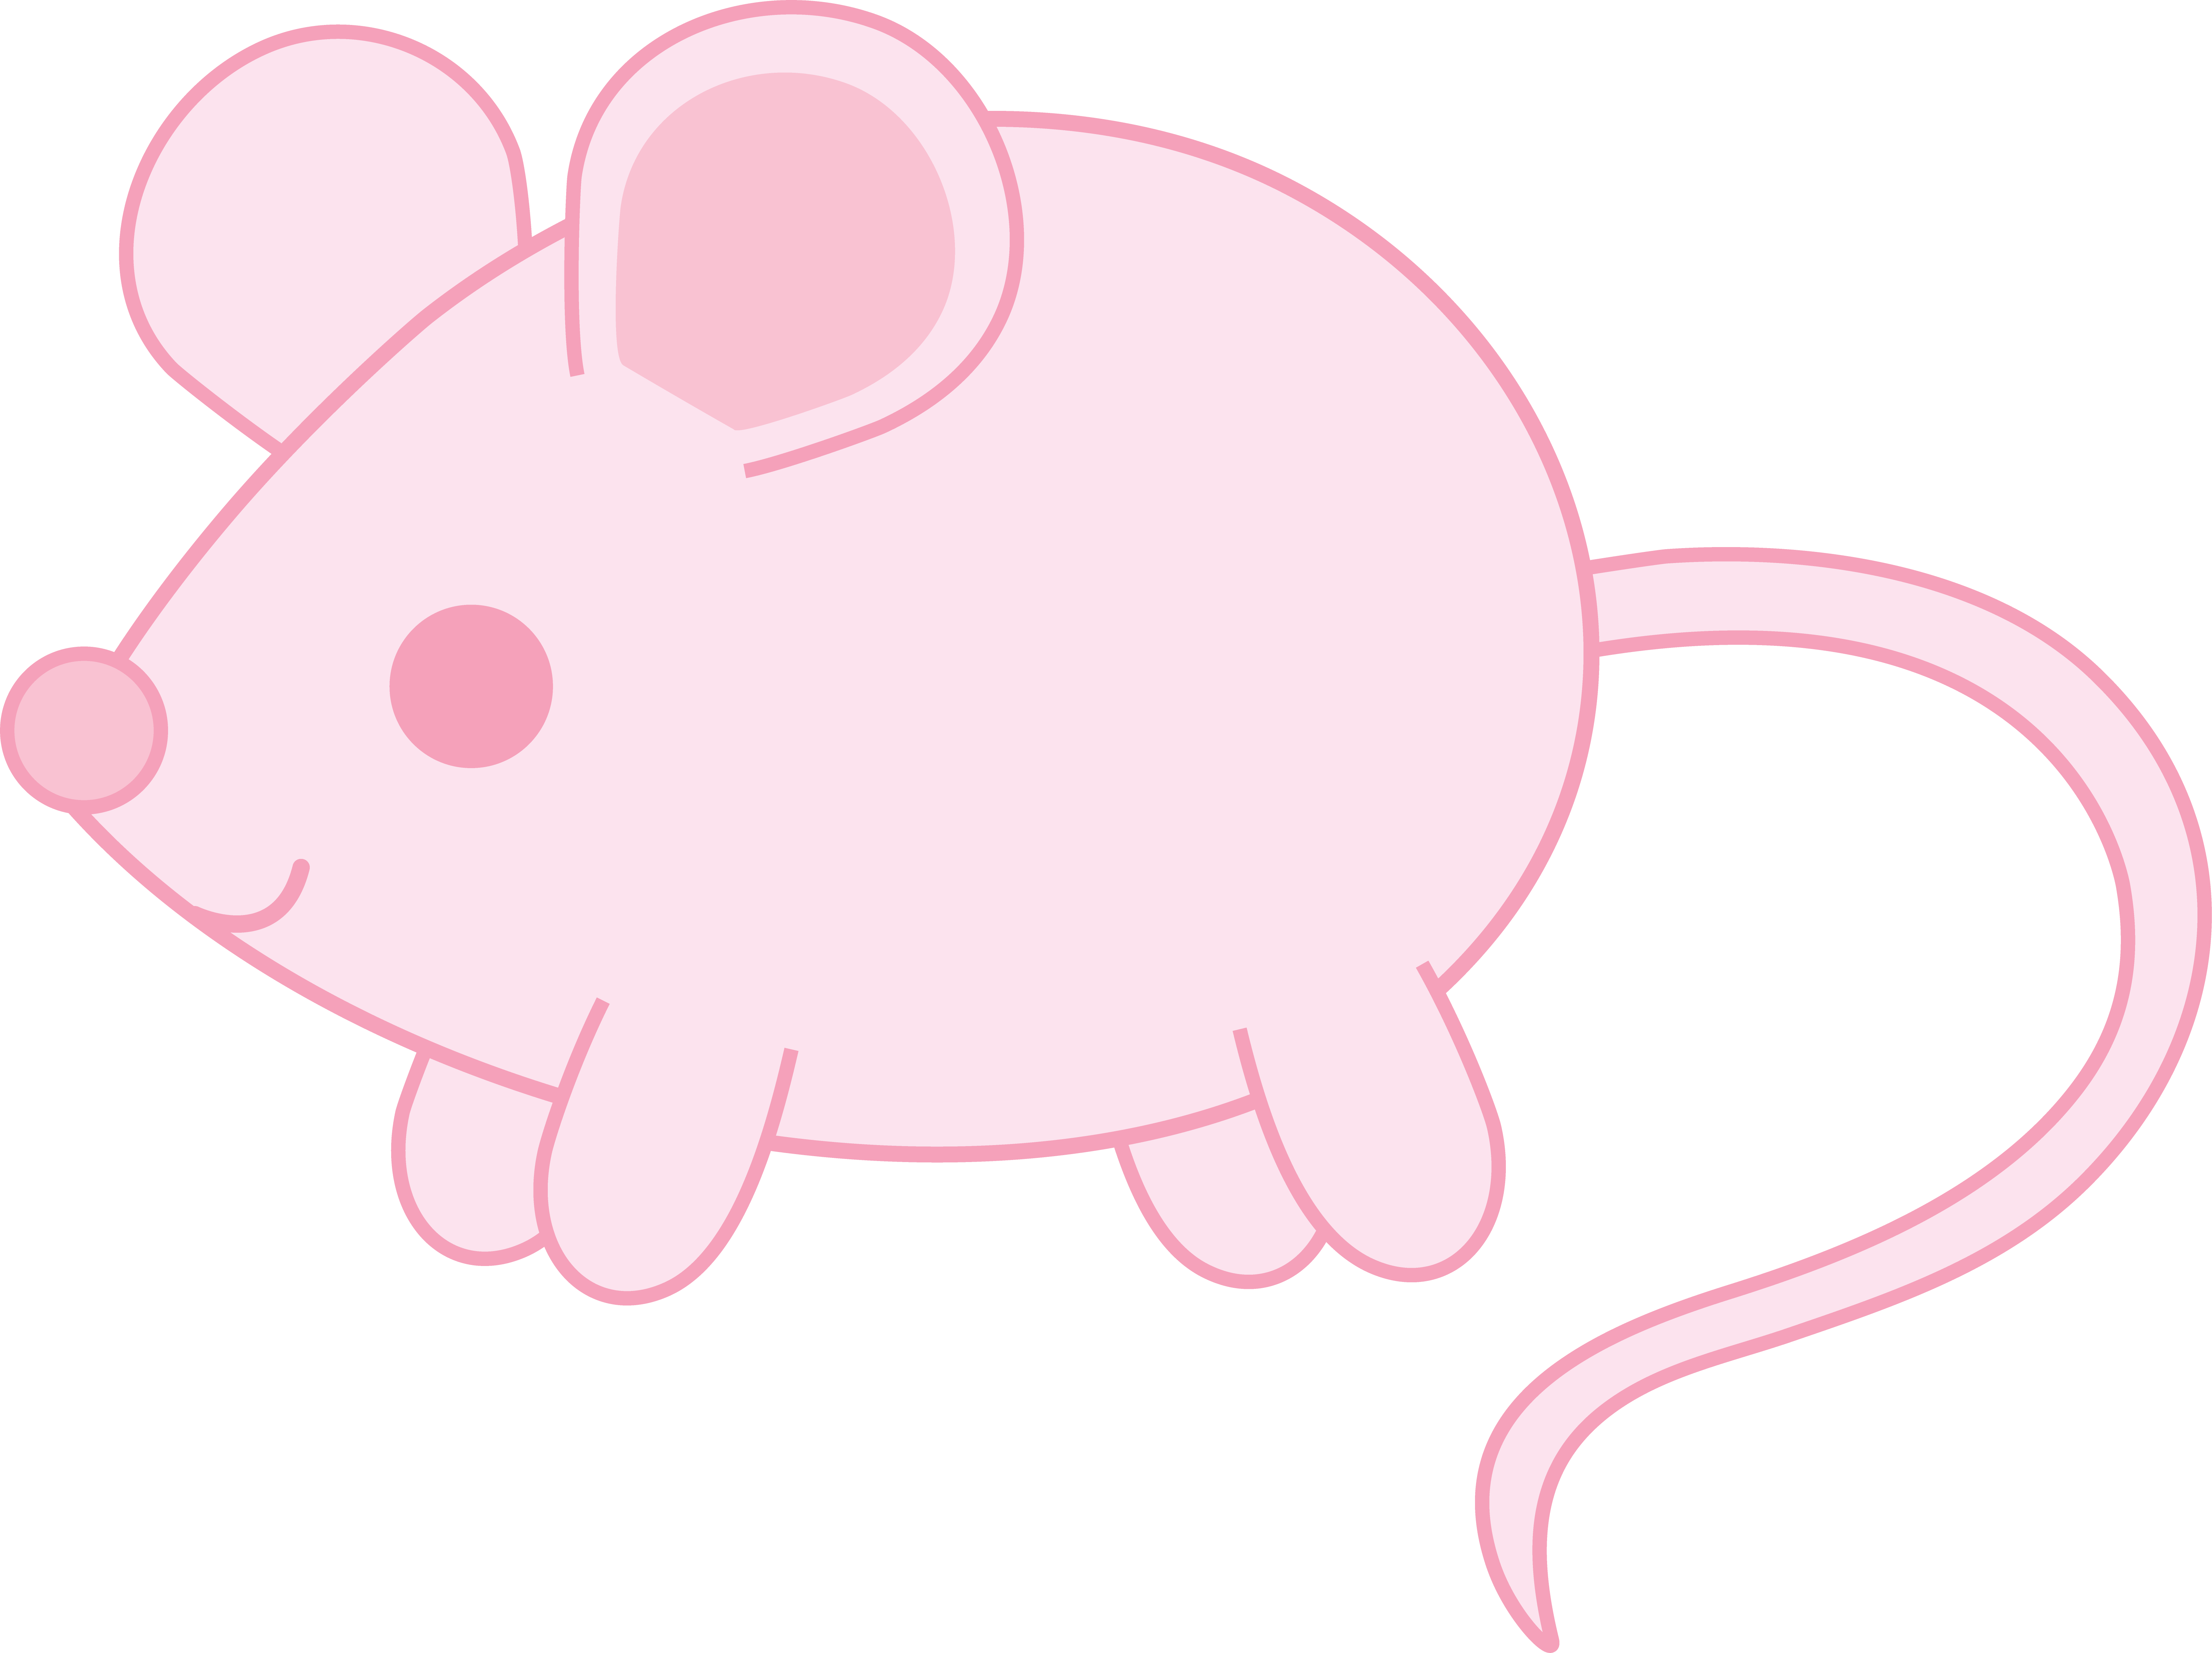 clipart of a little mouse - photo #48